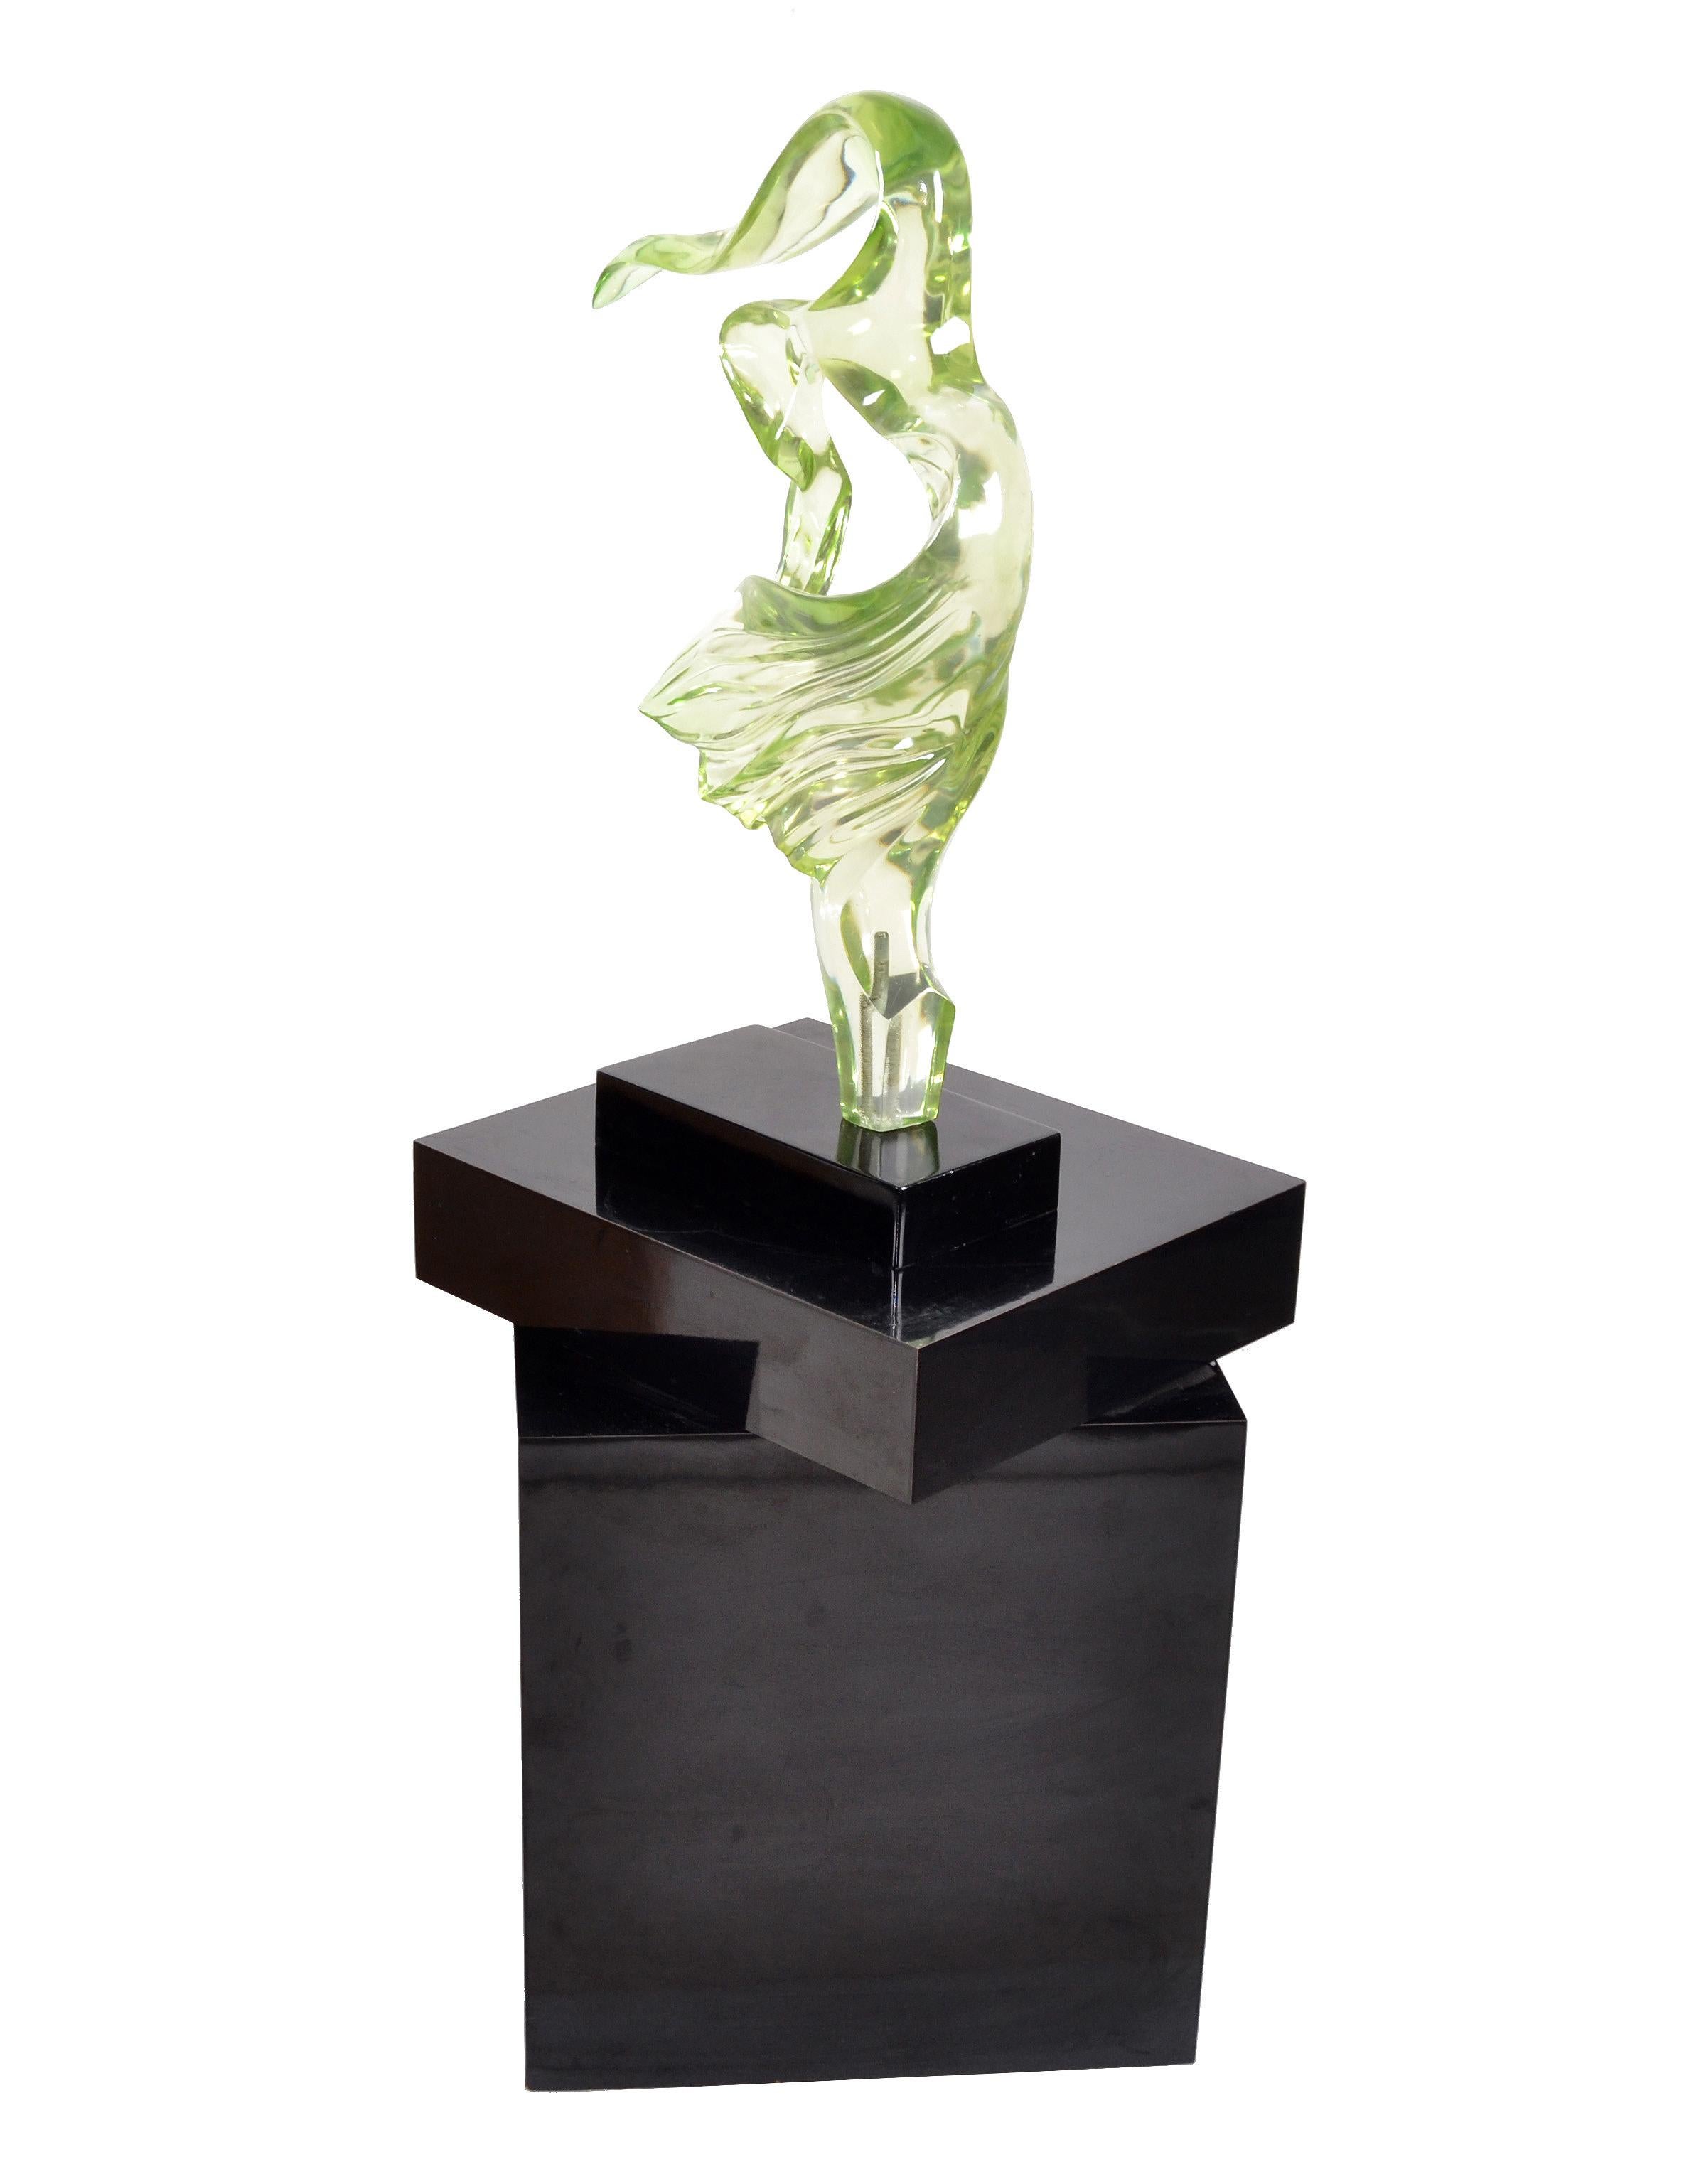 Abstract 28 inches tall neon green Lucite sculpture mounted on a black lacquered wooden base from the 1980s.
Mid-Century Modern era.
   